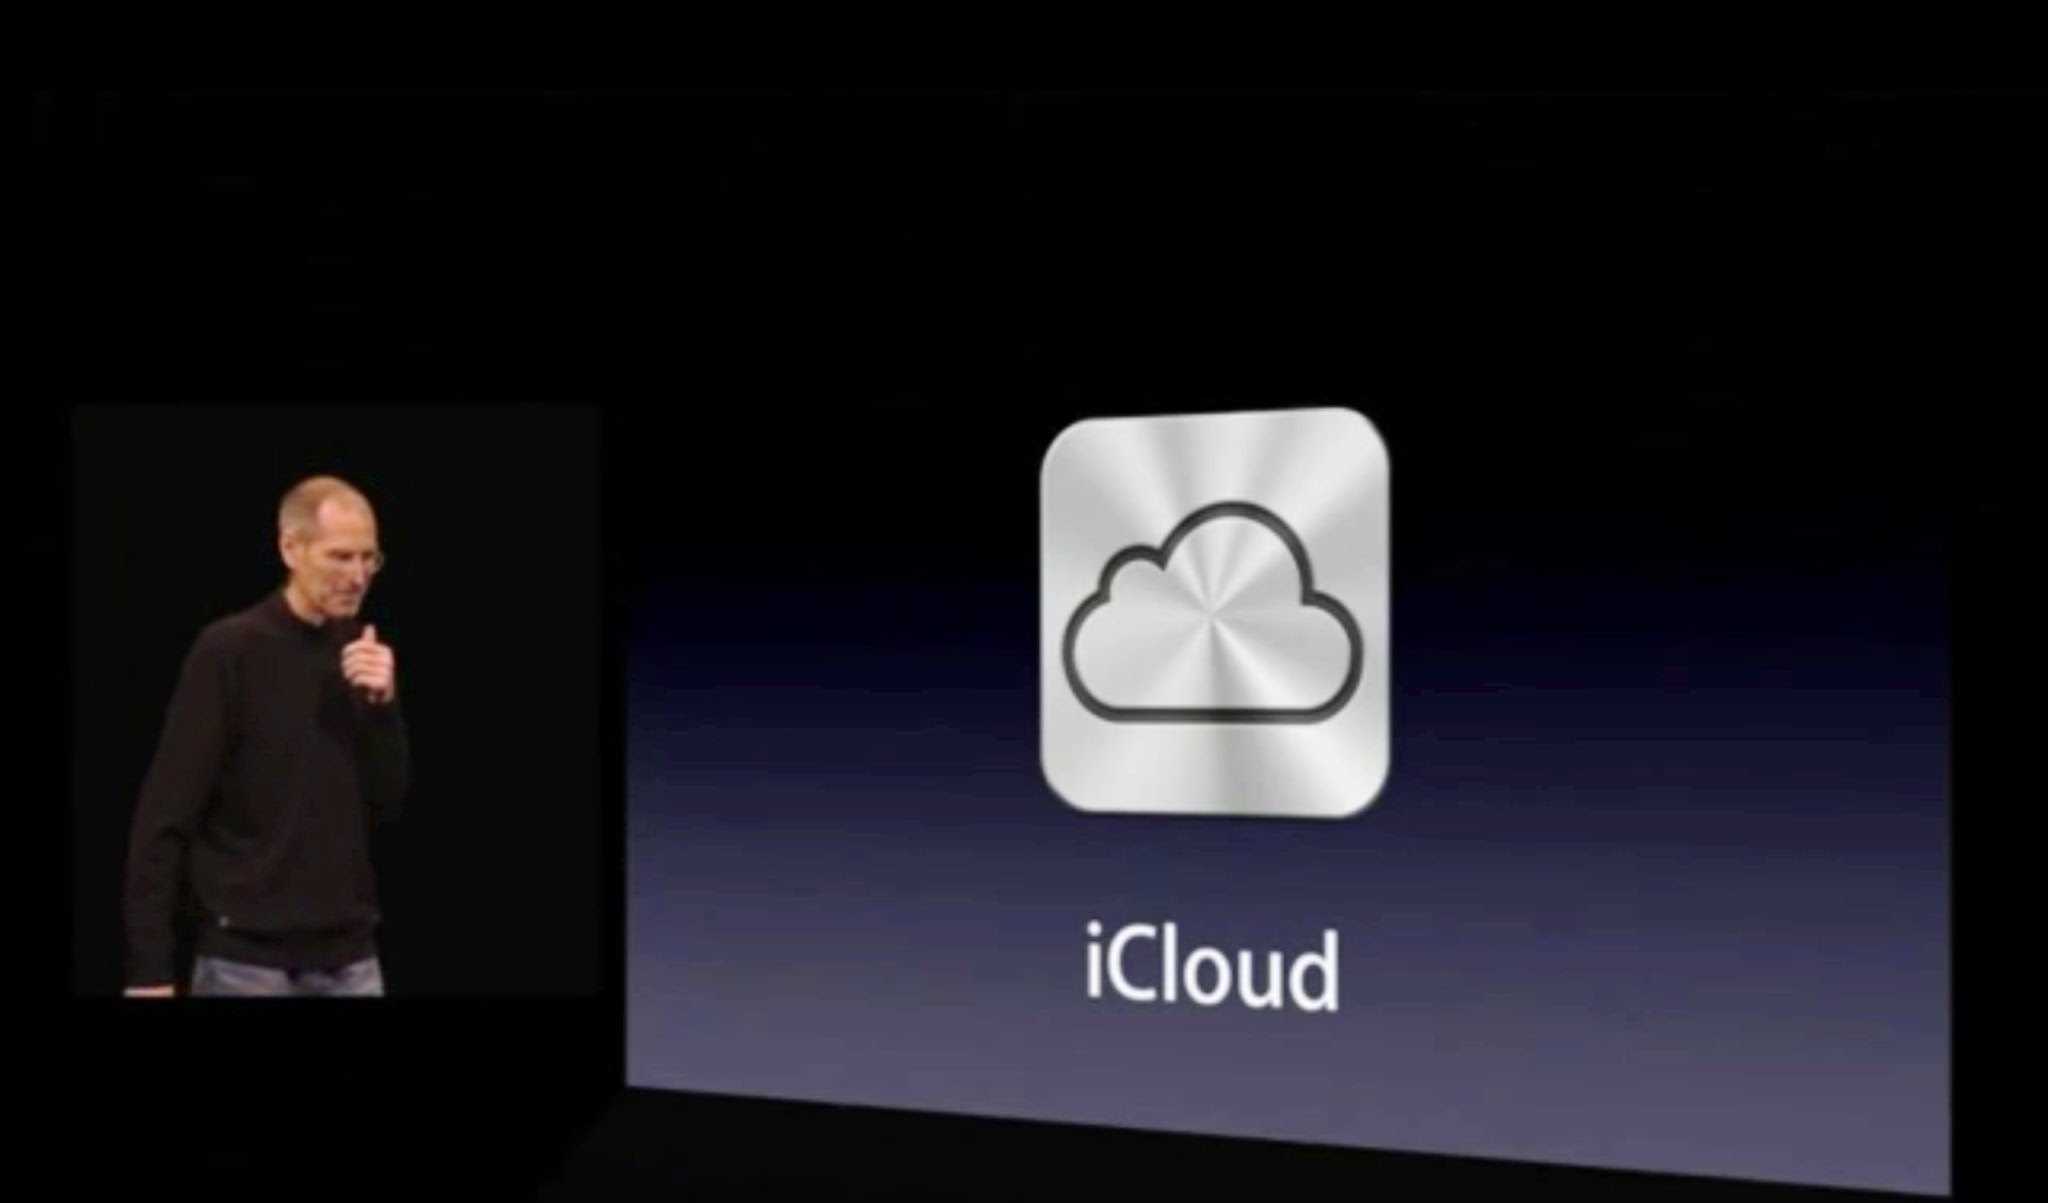 Steve Jobs shows iCloud to the world.